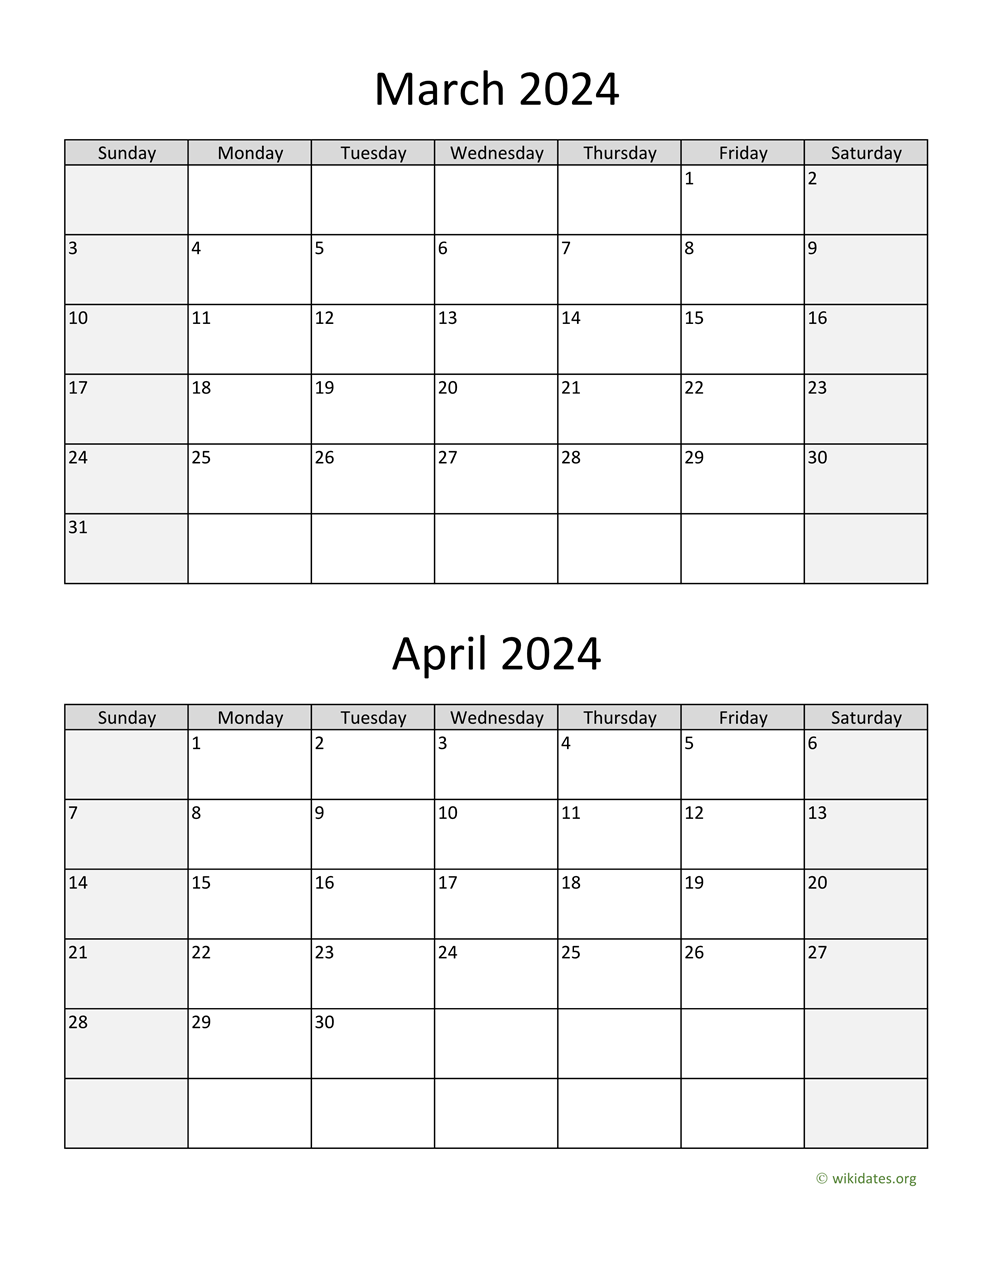 March And April 2024 Calendar | Wikidates for March And April Calendar 2024 Printable